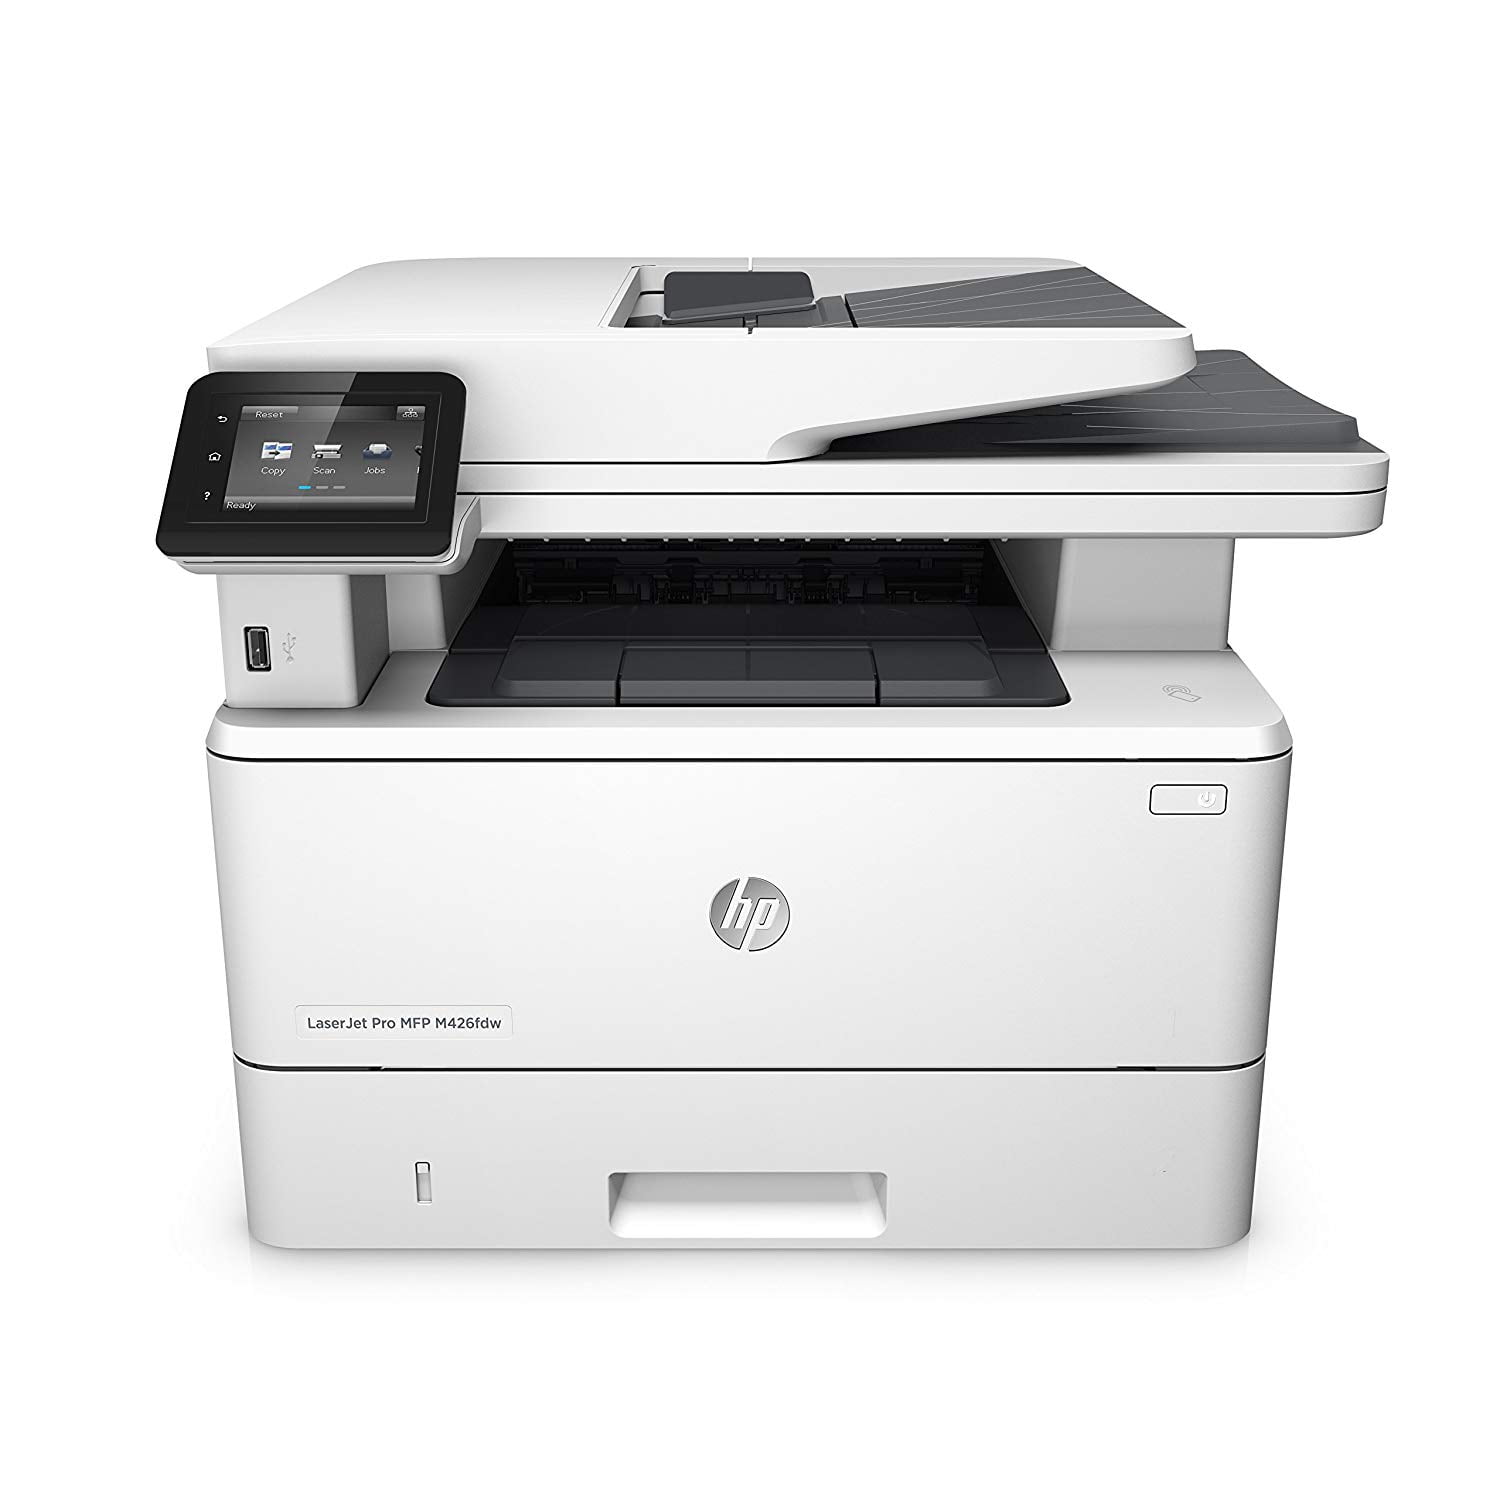 is hp laserjet p4015n under another model name